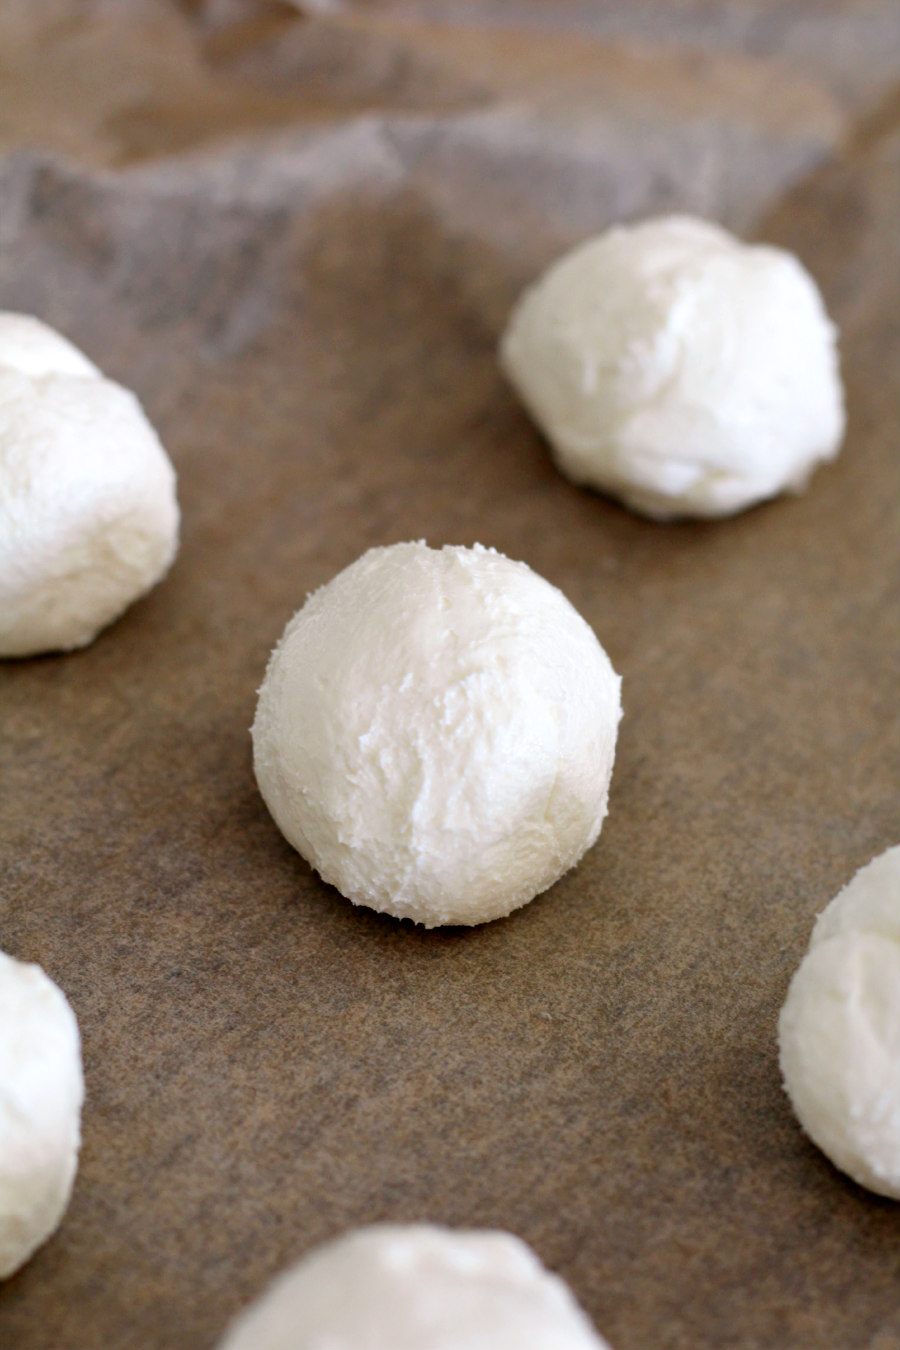 Goat cheese and cream cheese mixture rolled into balls and placed on parchment paper lined baking sheet.